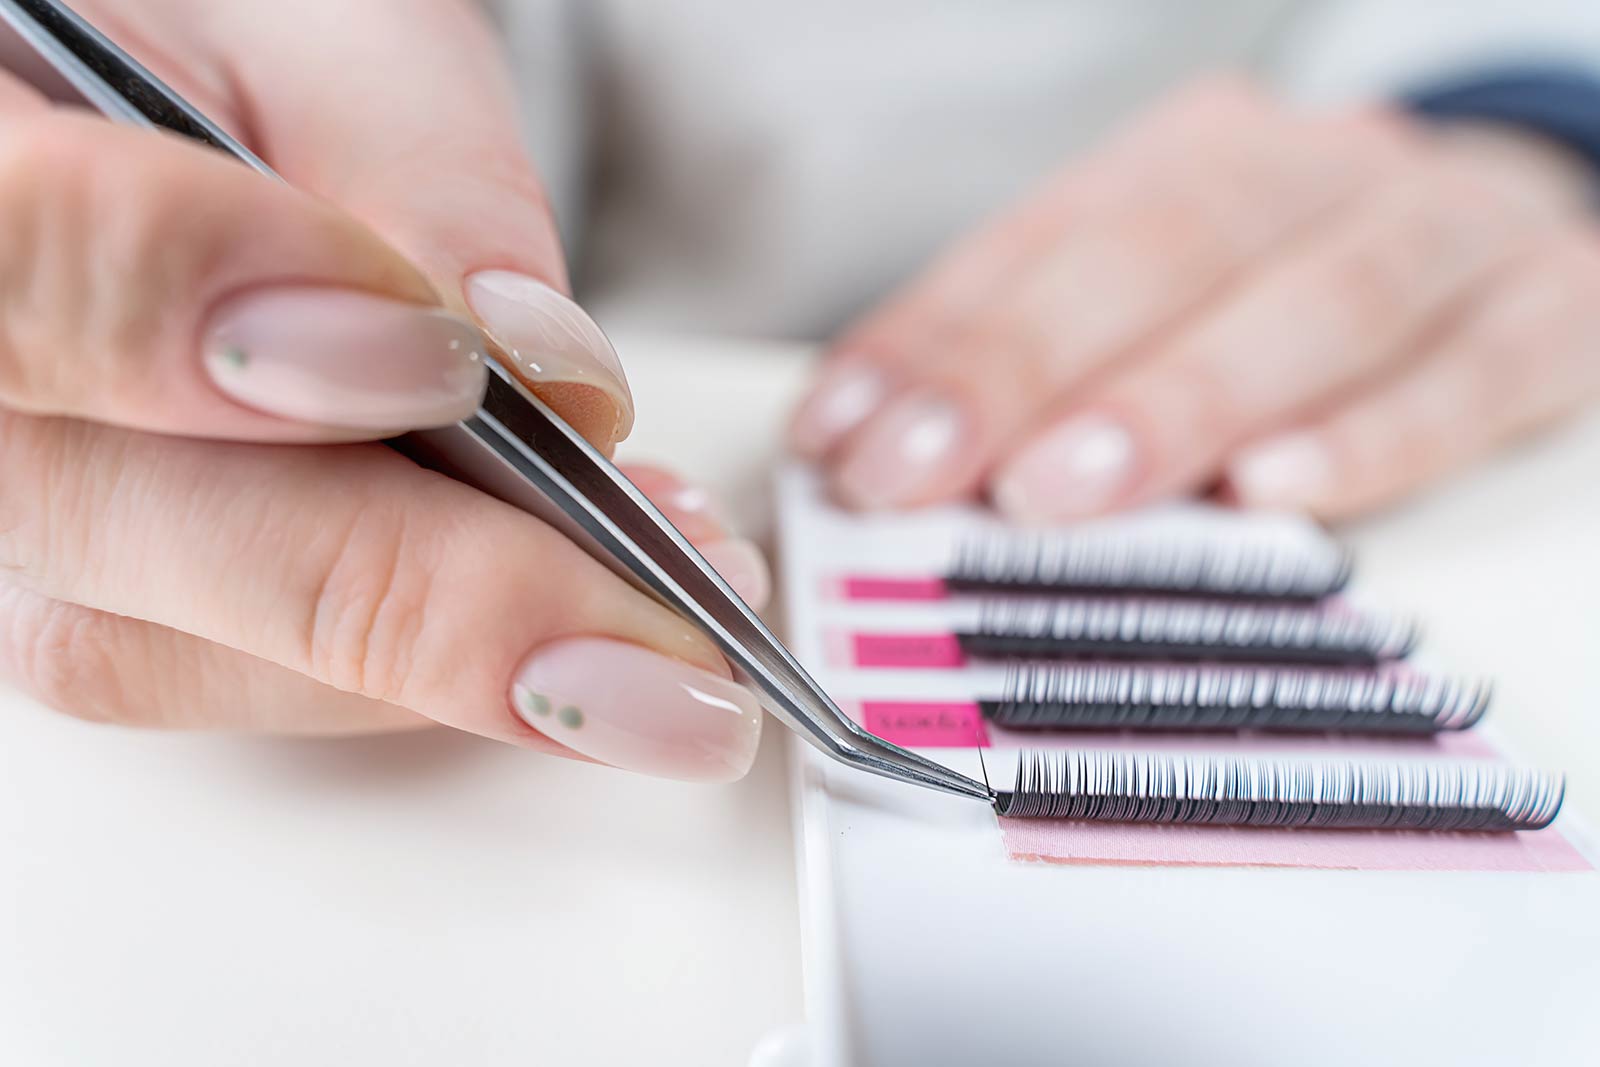 Cost of Eyelash Extensions - Is it really worth it?